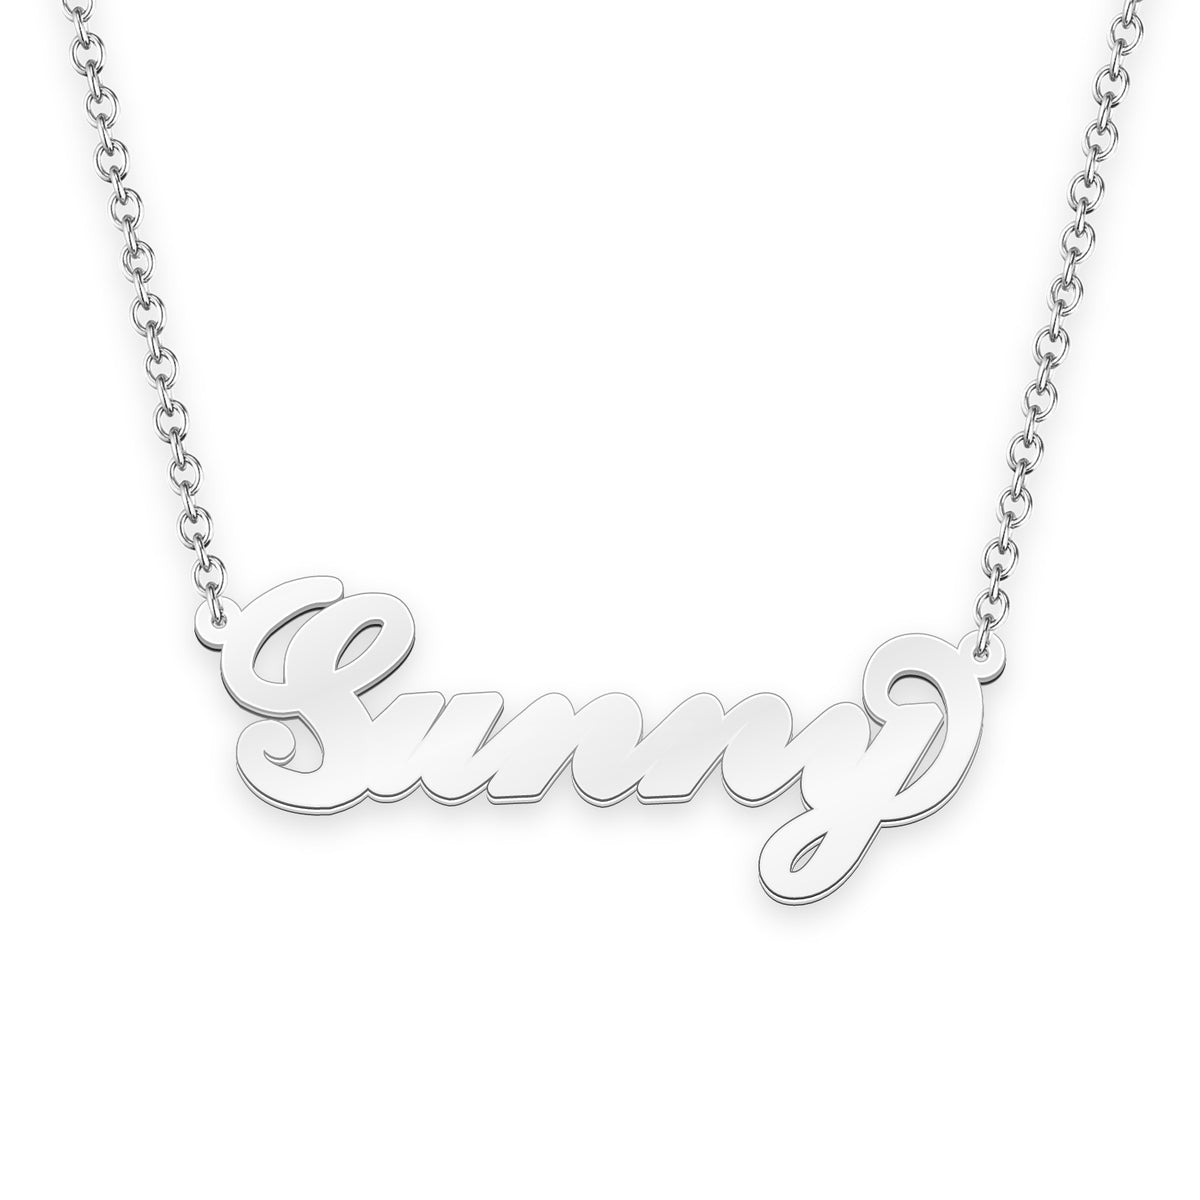 Sunny name necklace Gold Custom Necklace, Personalized Gifts For ...